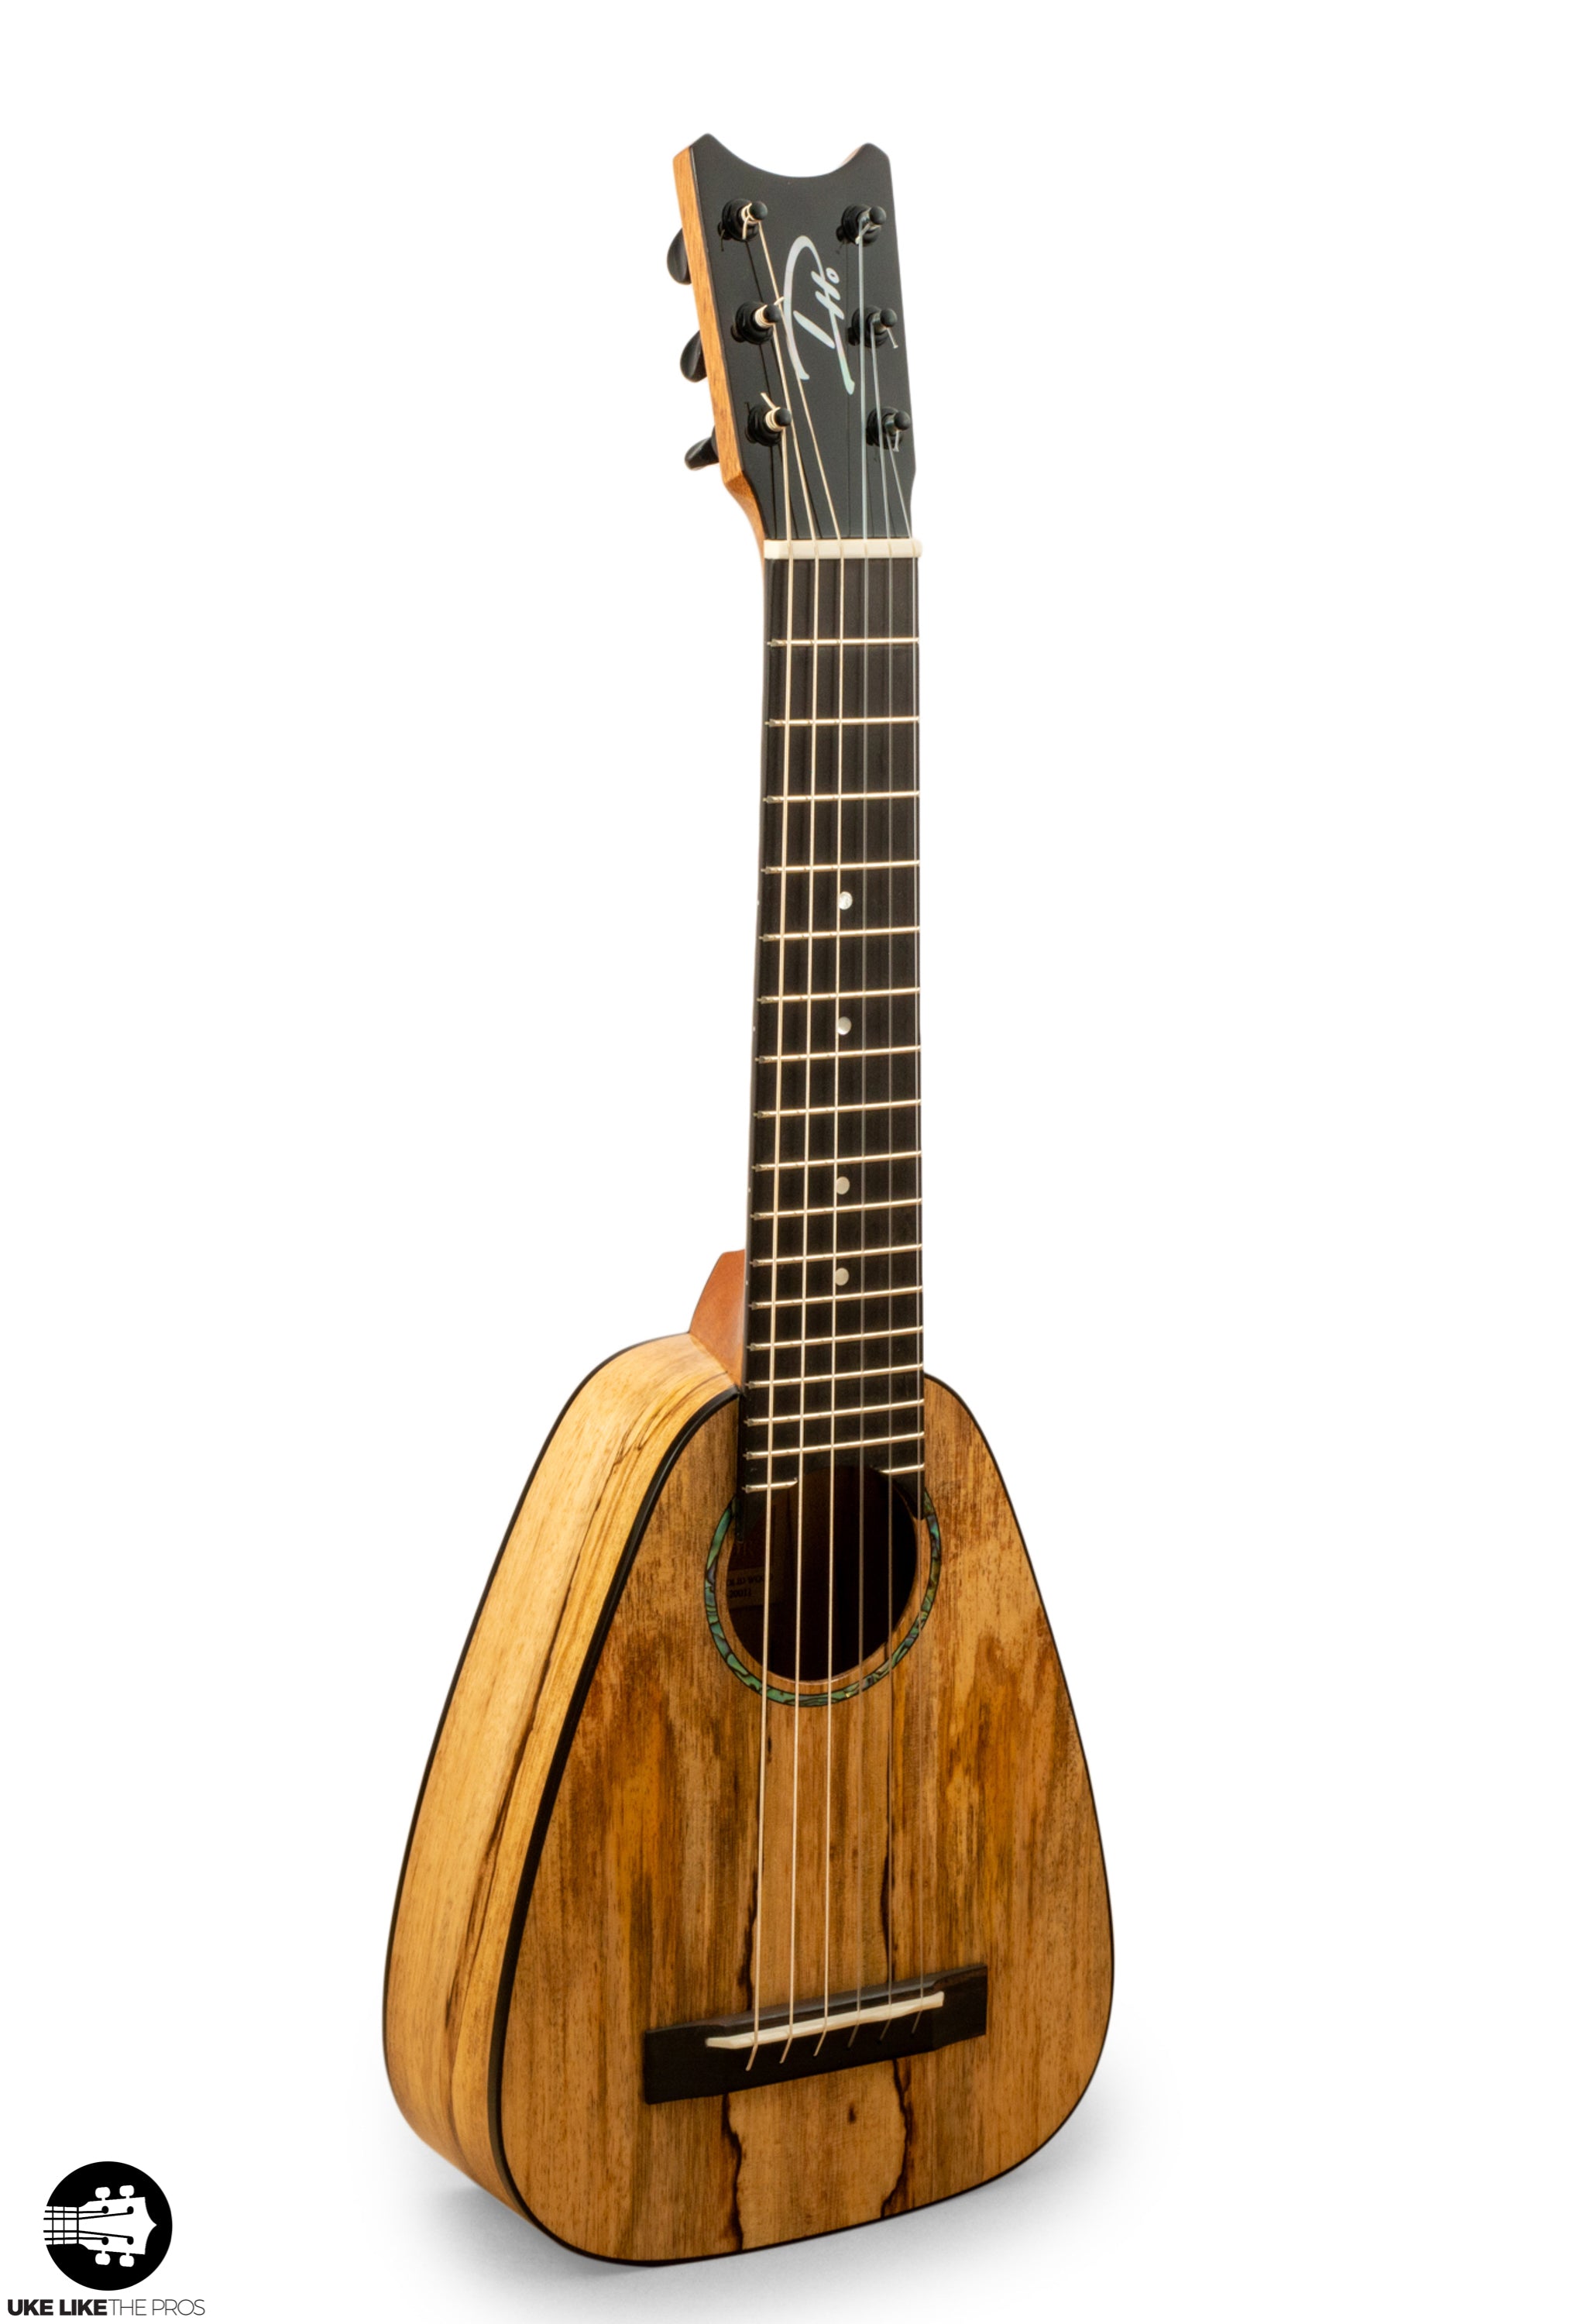 Romero Creations RC-TT6-MG 6 String Guilele Spalted Mango "Norwich" Tuned A to A